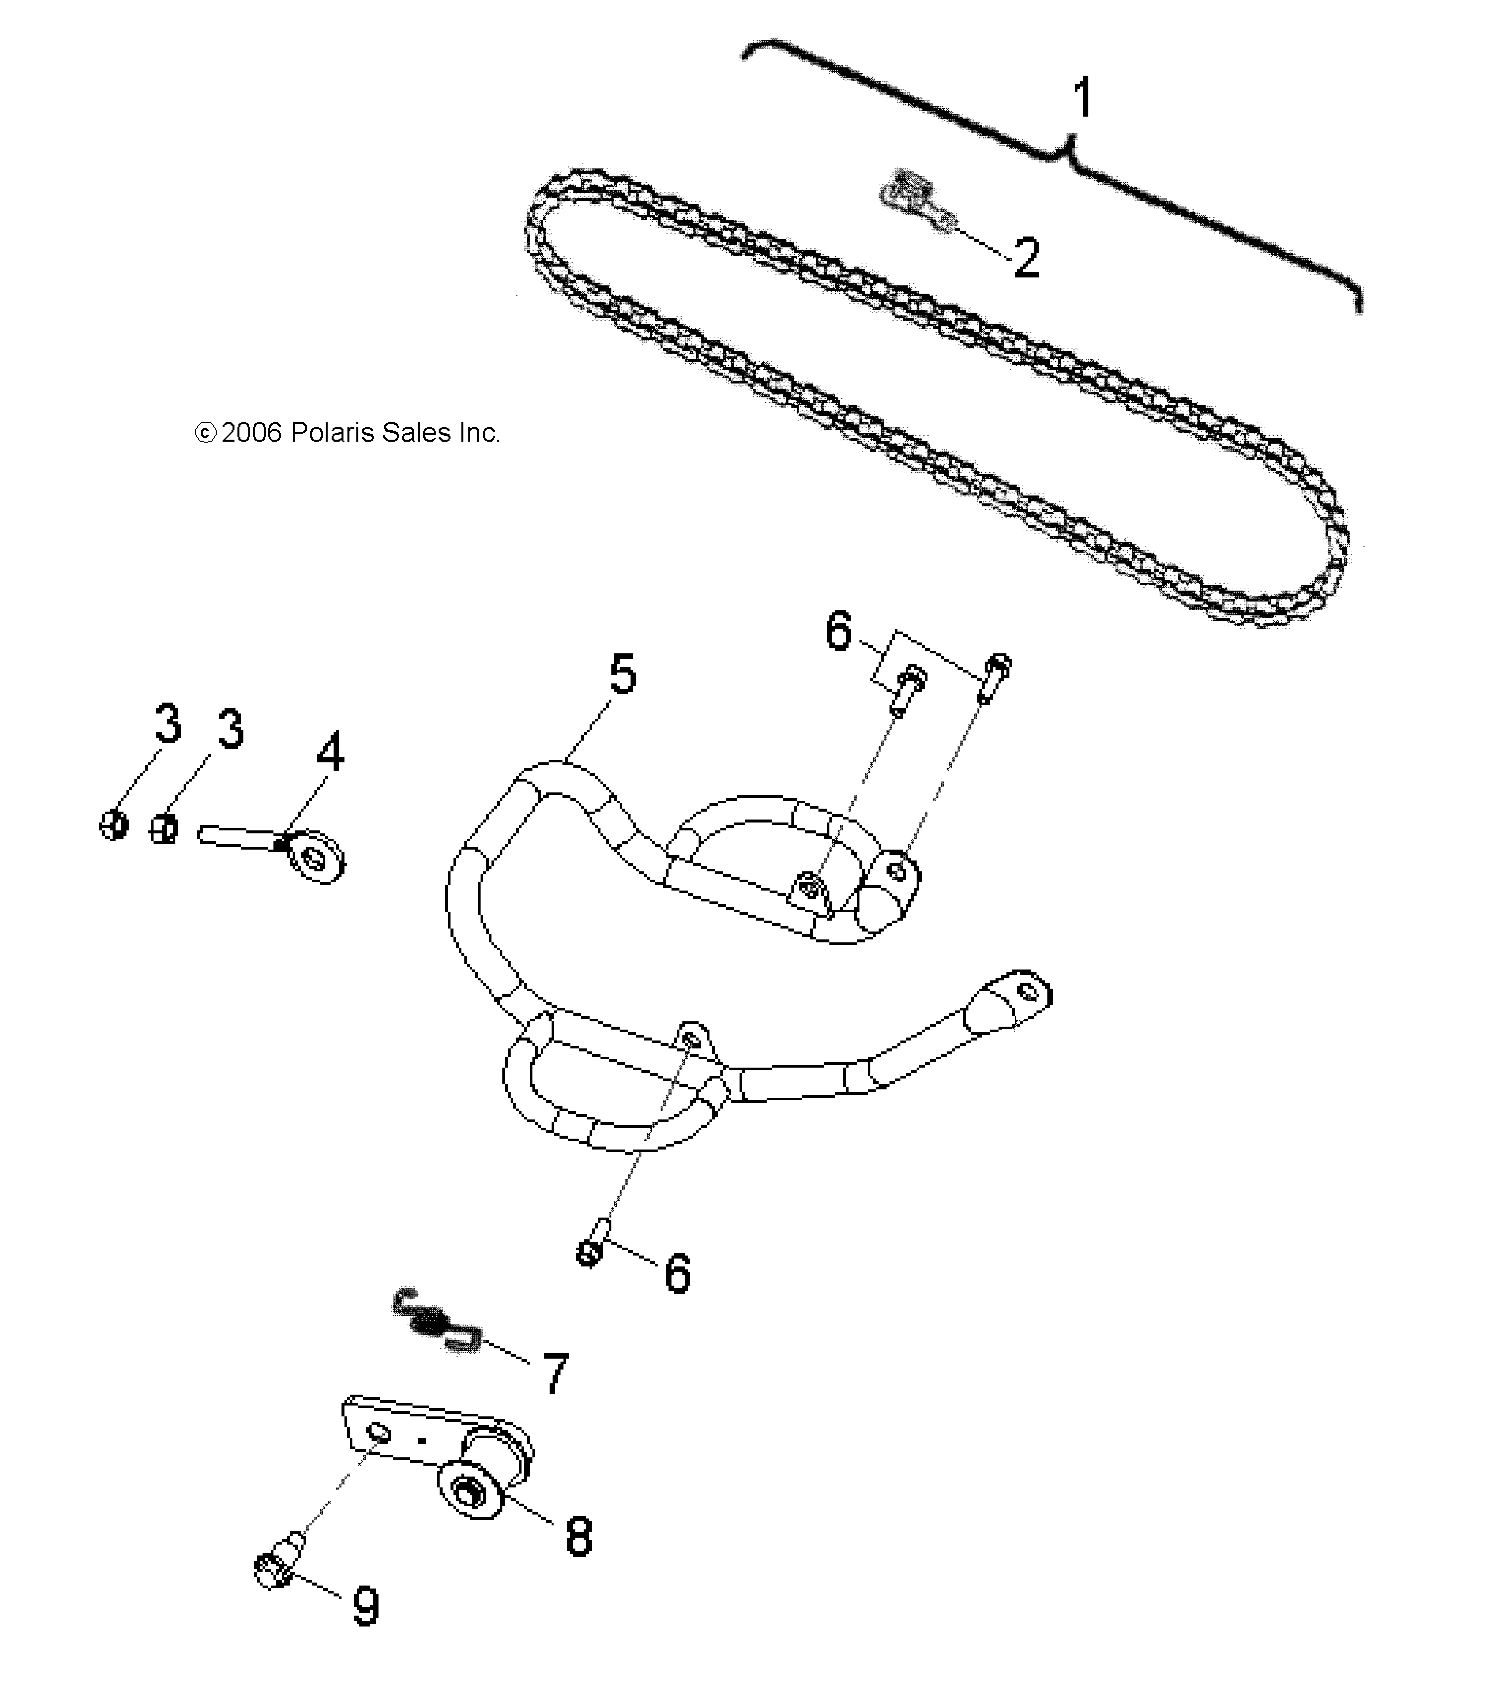 Part Number : 0455447 ASM-DRIVE CHAIN